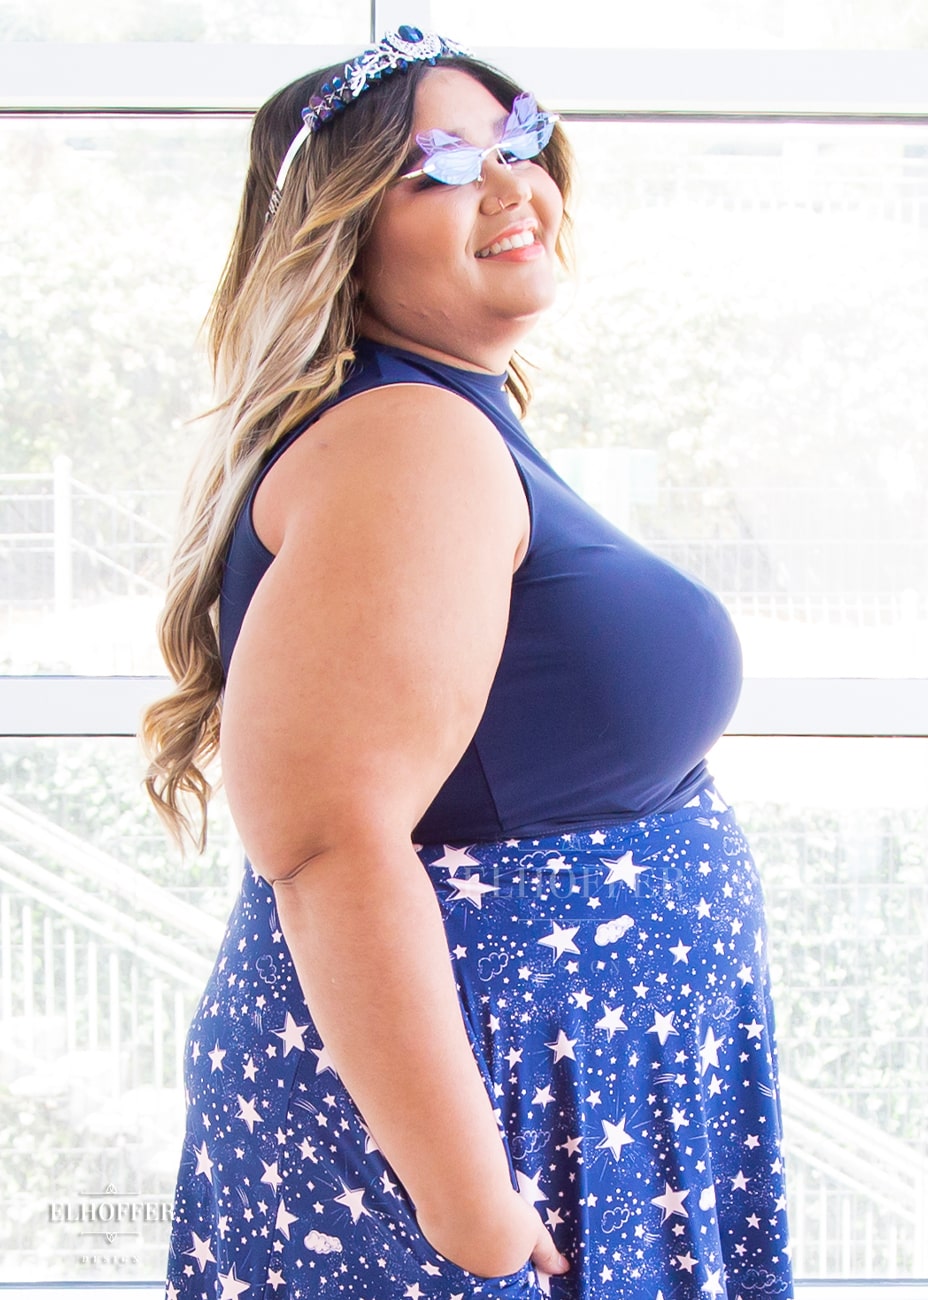 Cori, a medium skinned size 2XL model with brunette and blonde ombre hair, wears a navy a mock turtle necked fitted sleeveless crop top ending at her waist and long skirt covered in a blue and pink celestial print. She stands to the side with her hands in her pocket.